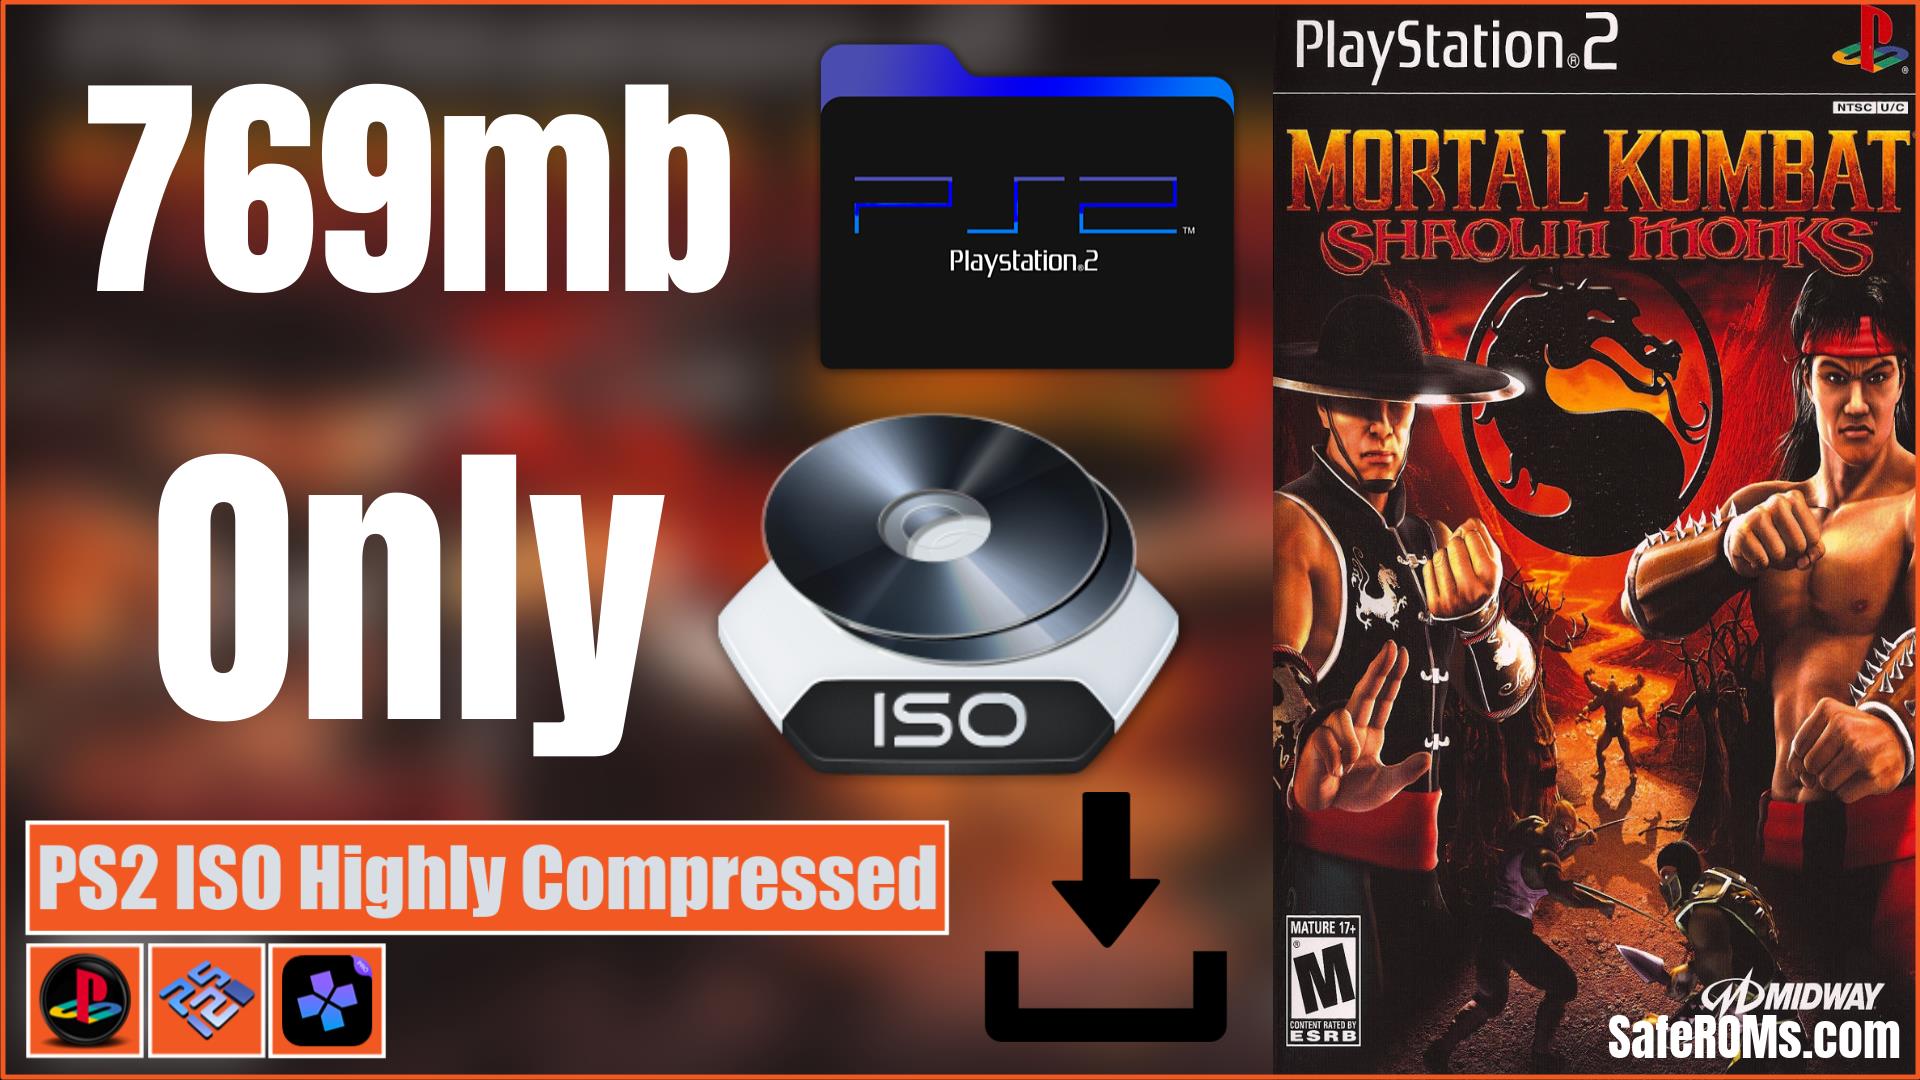 Mortal Kombat - Shaolin Monks PS2 ISO Highly Compressed Download